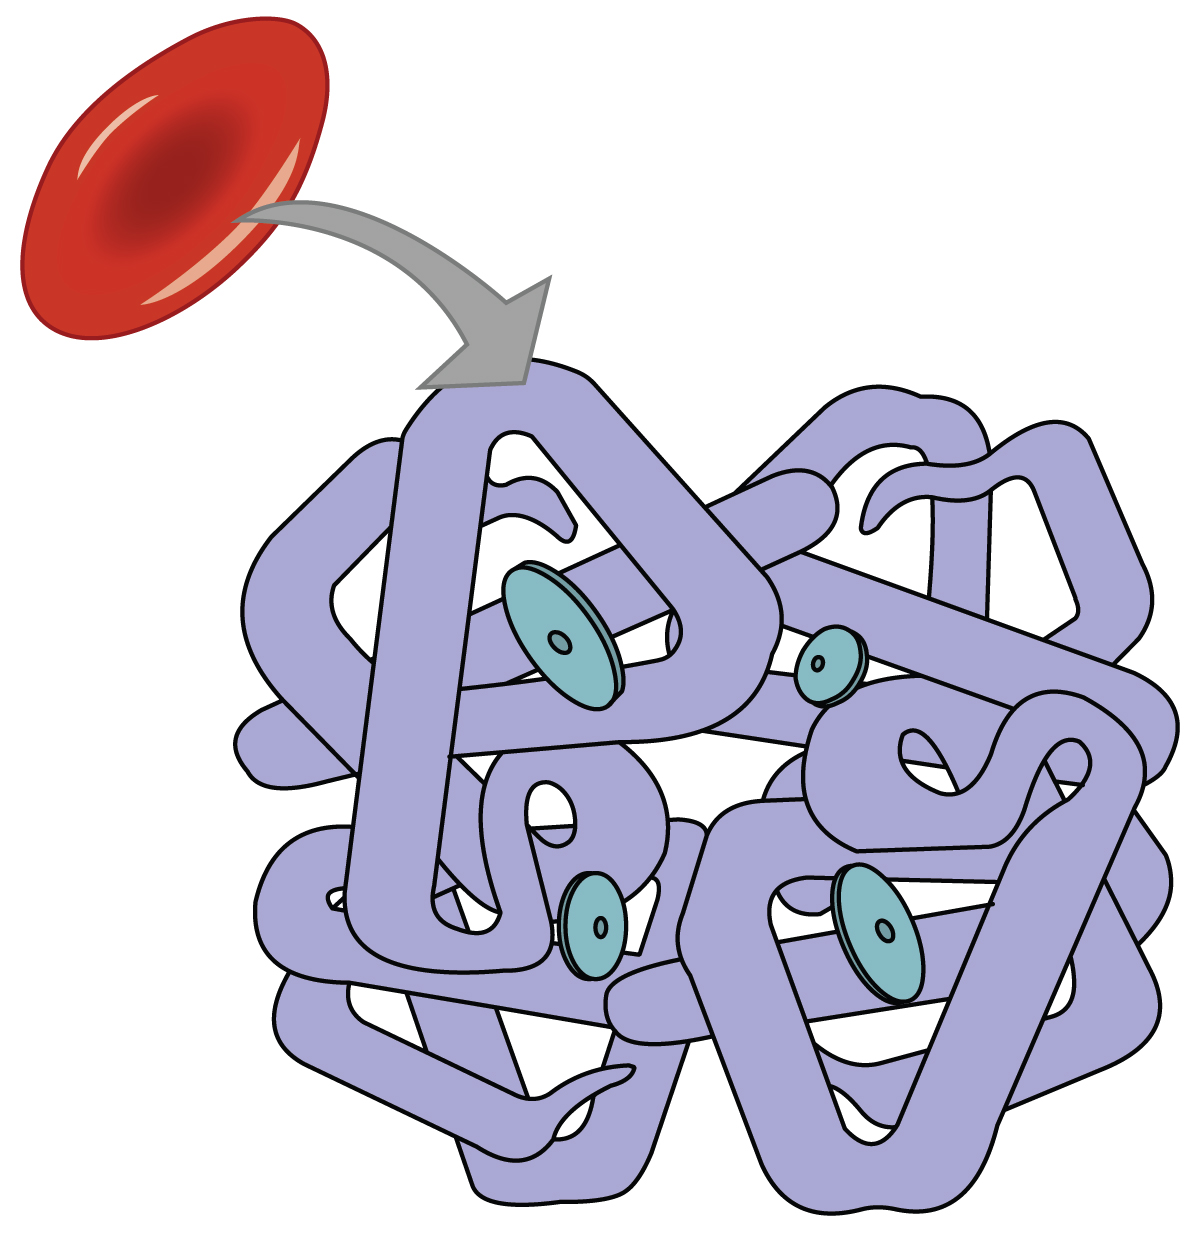 This diagram shows a red blood cell and the structure of a hemoglobin molecule.